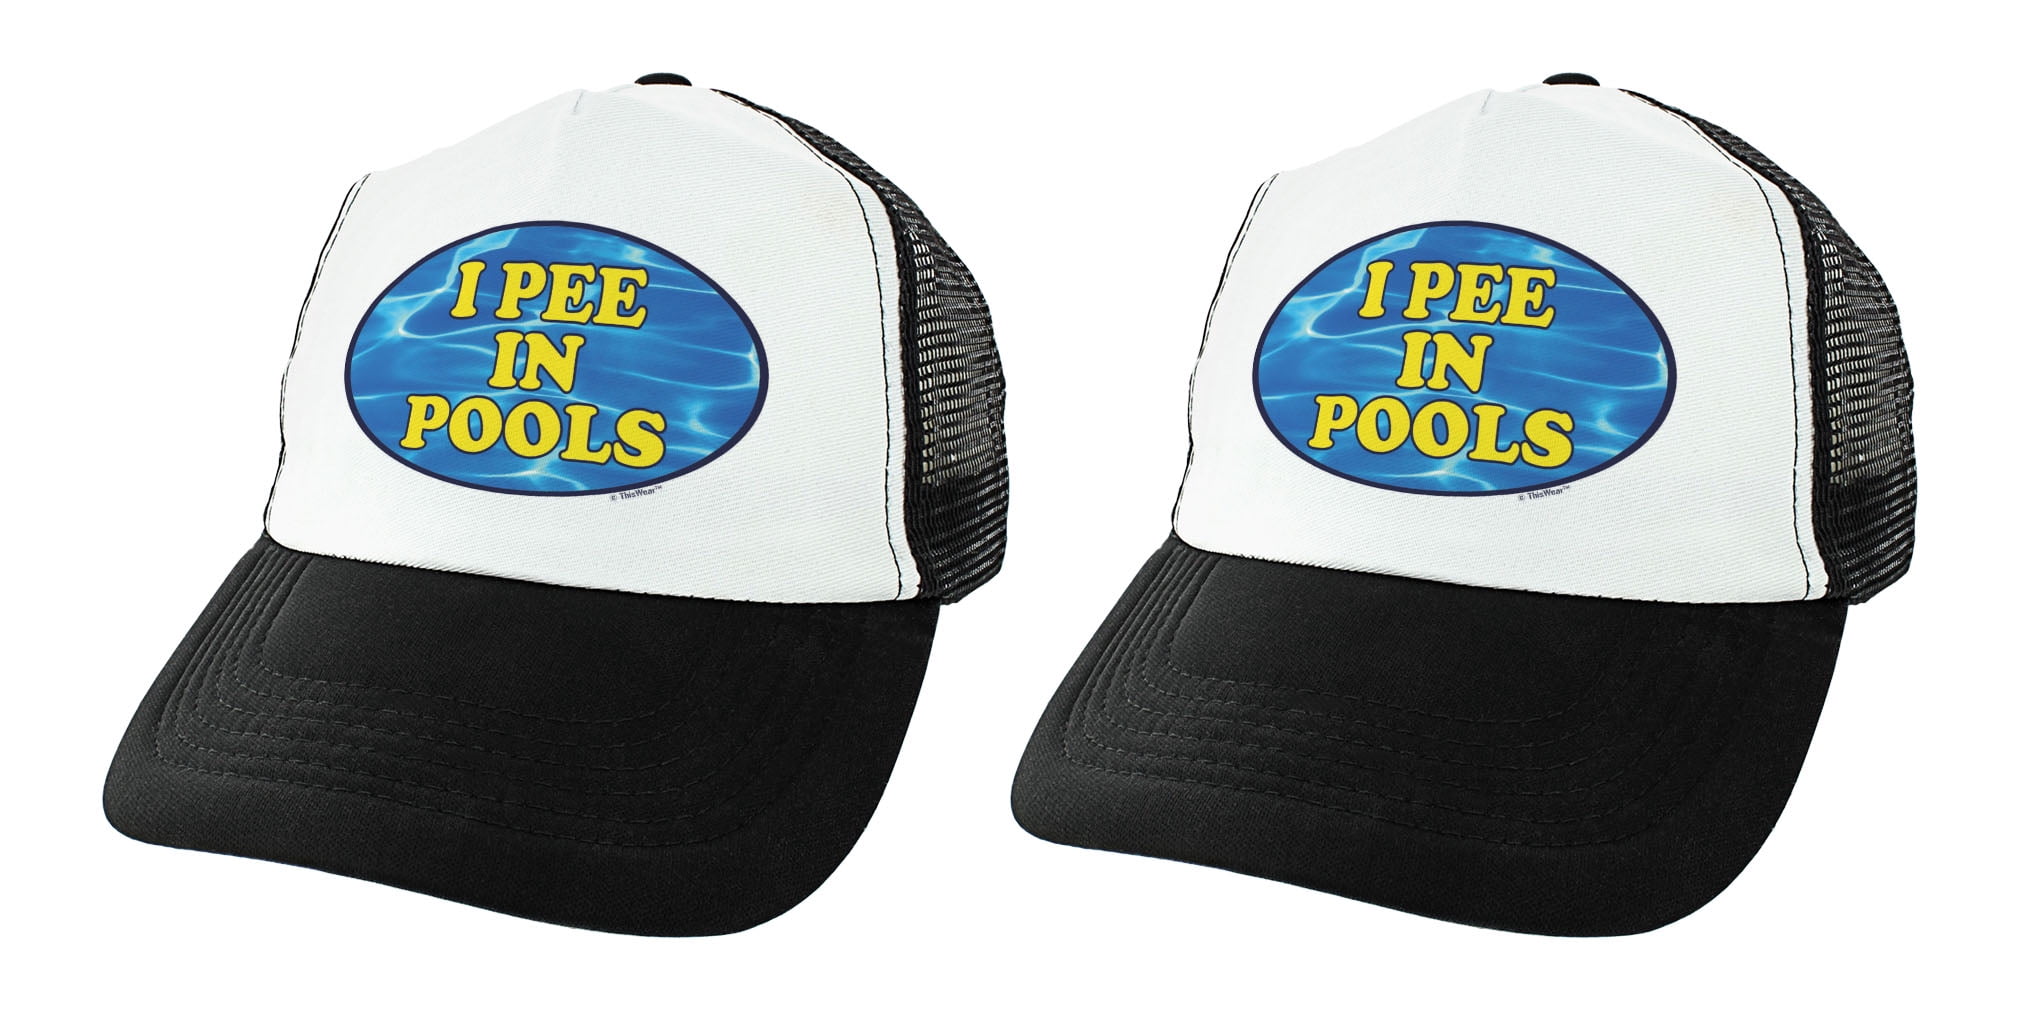 ThisWear Pool Gift Set Pee in Pools Gag Gifts for Adults Funny